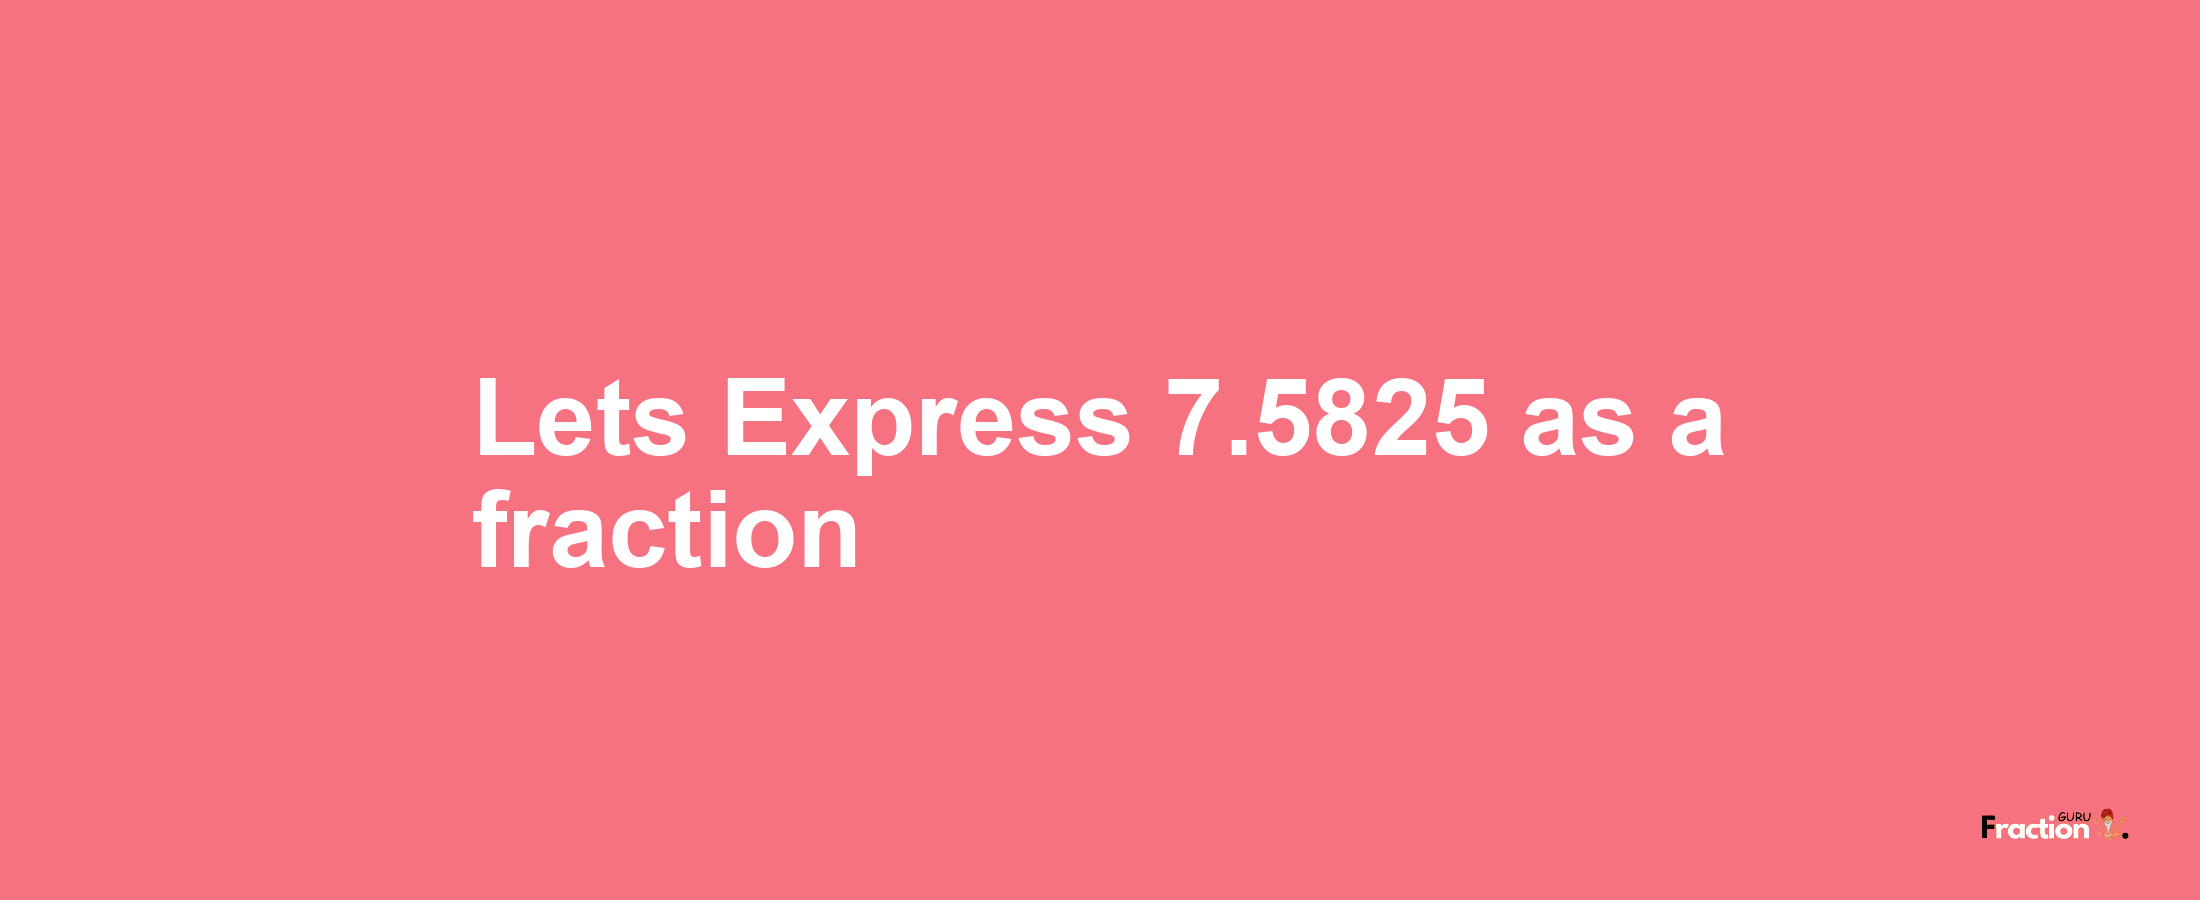 Lets Express 7.5825 as afraction